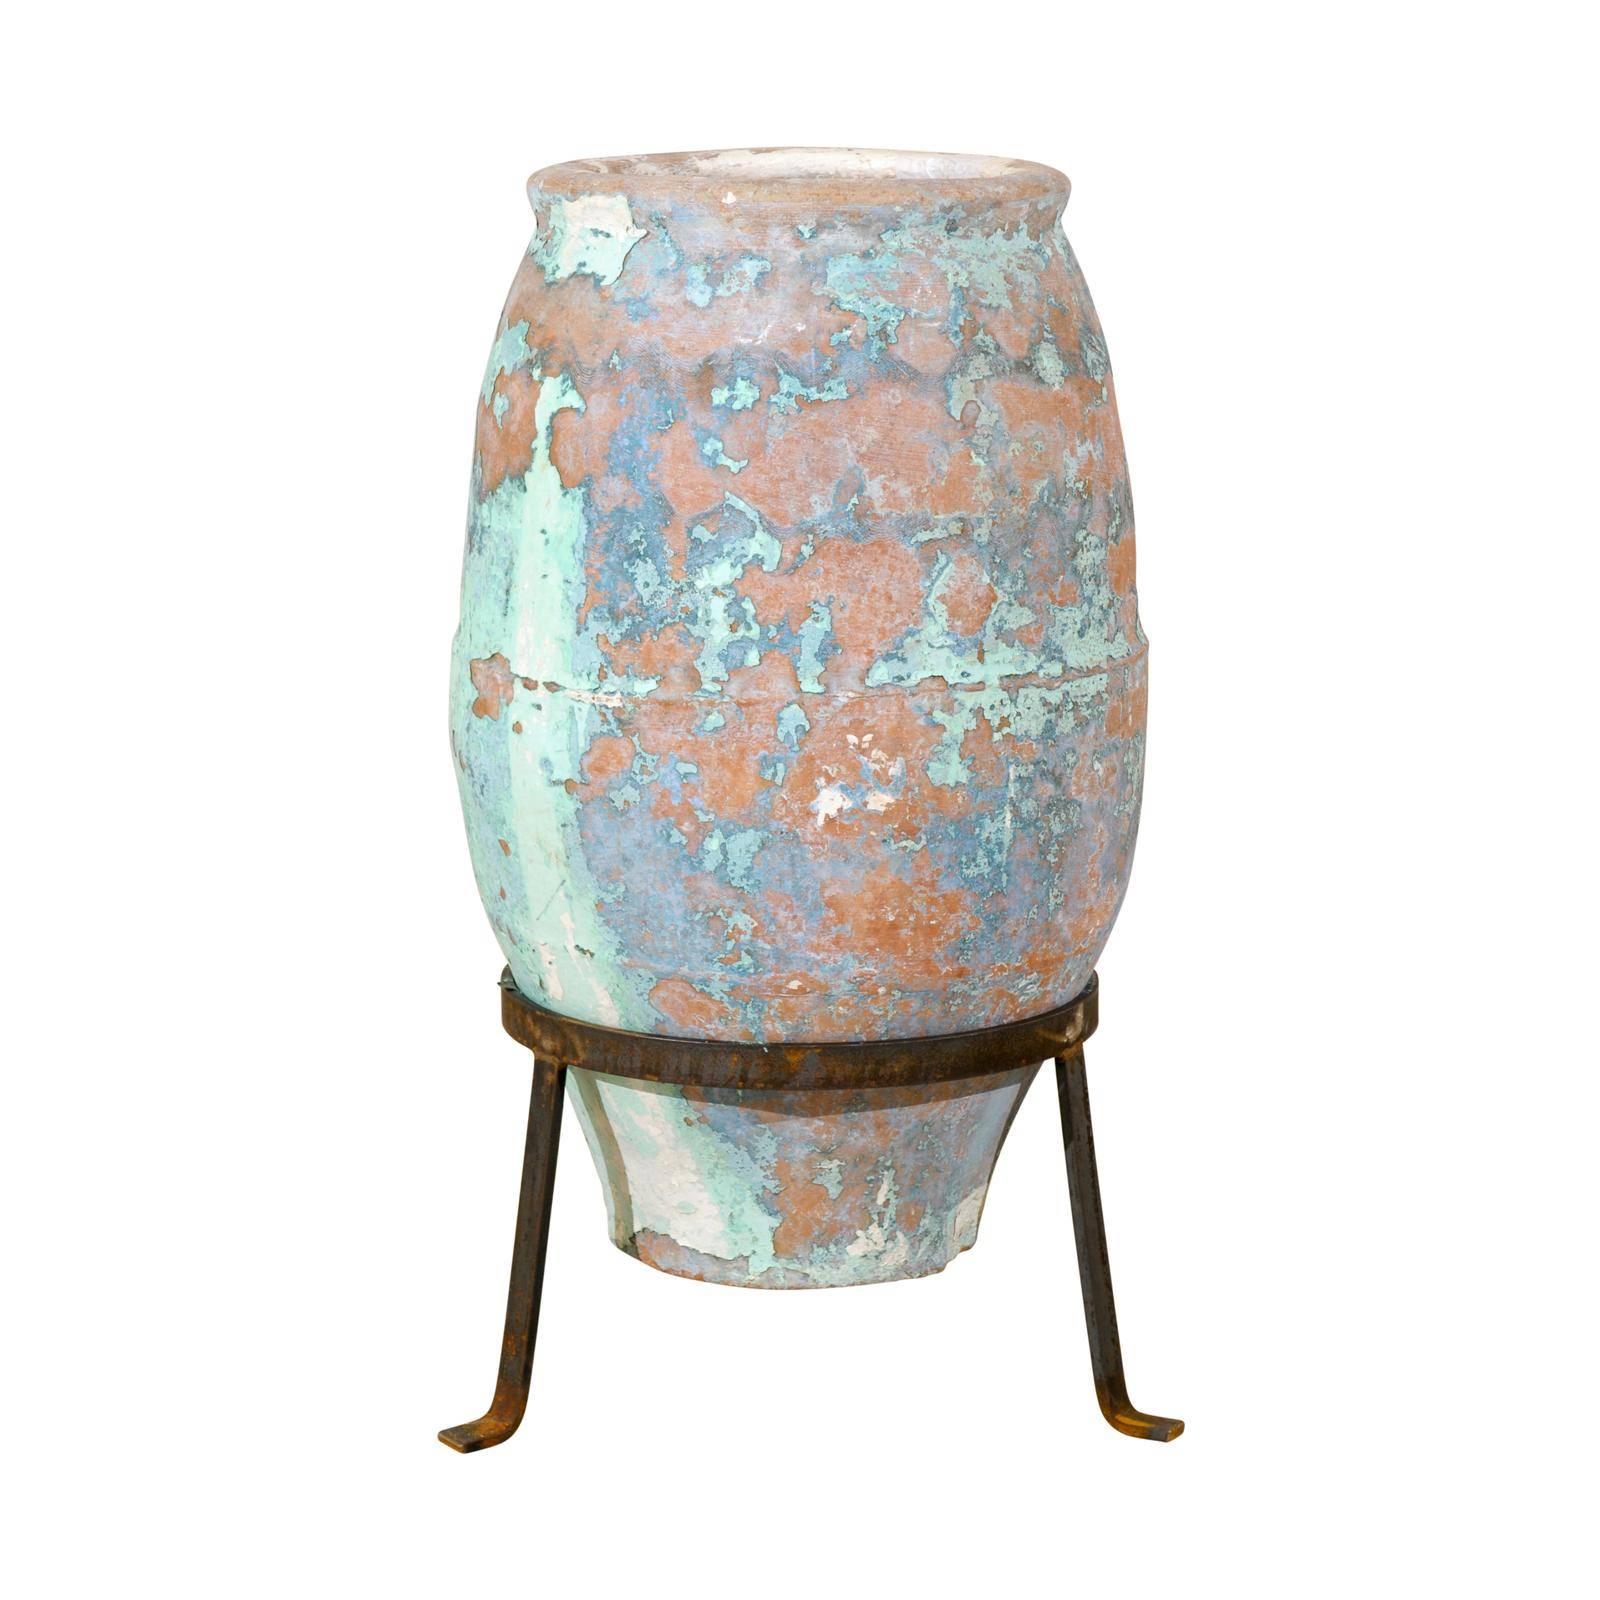 Aged Spanish Terracotta Olive Jar from the Mid-19th C. with Traces of Blue Paint For Sale